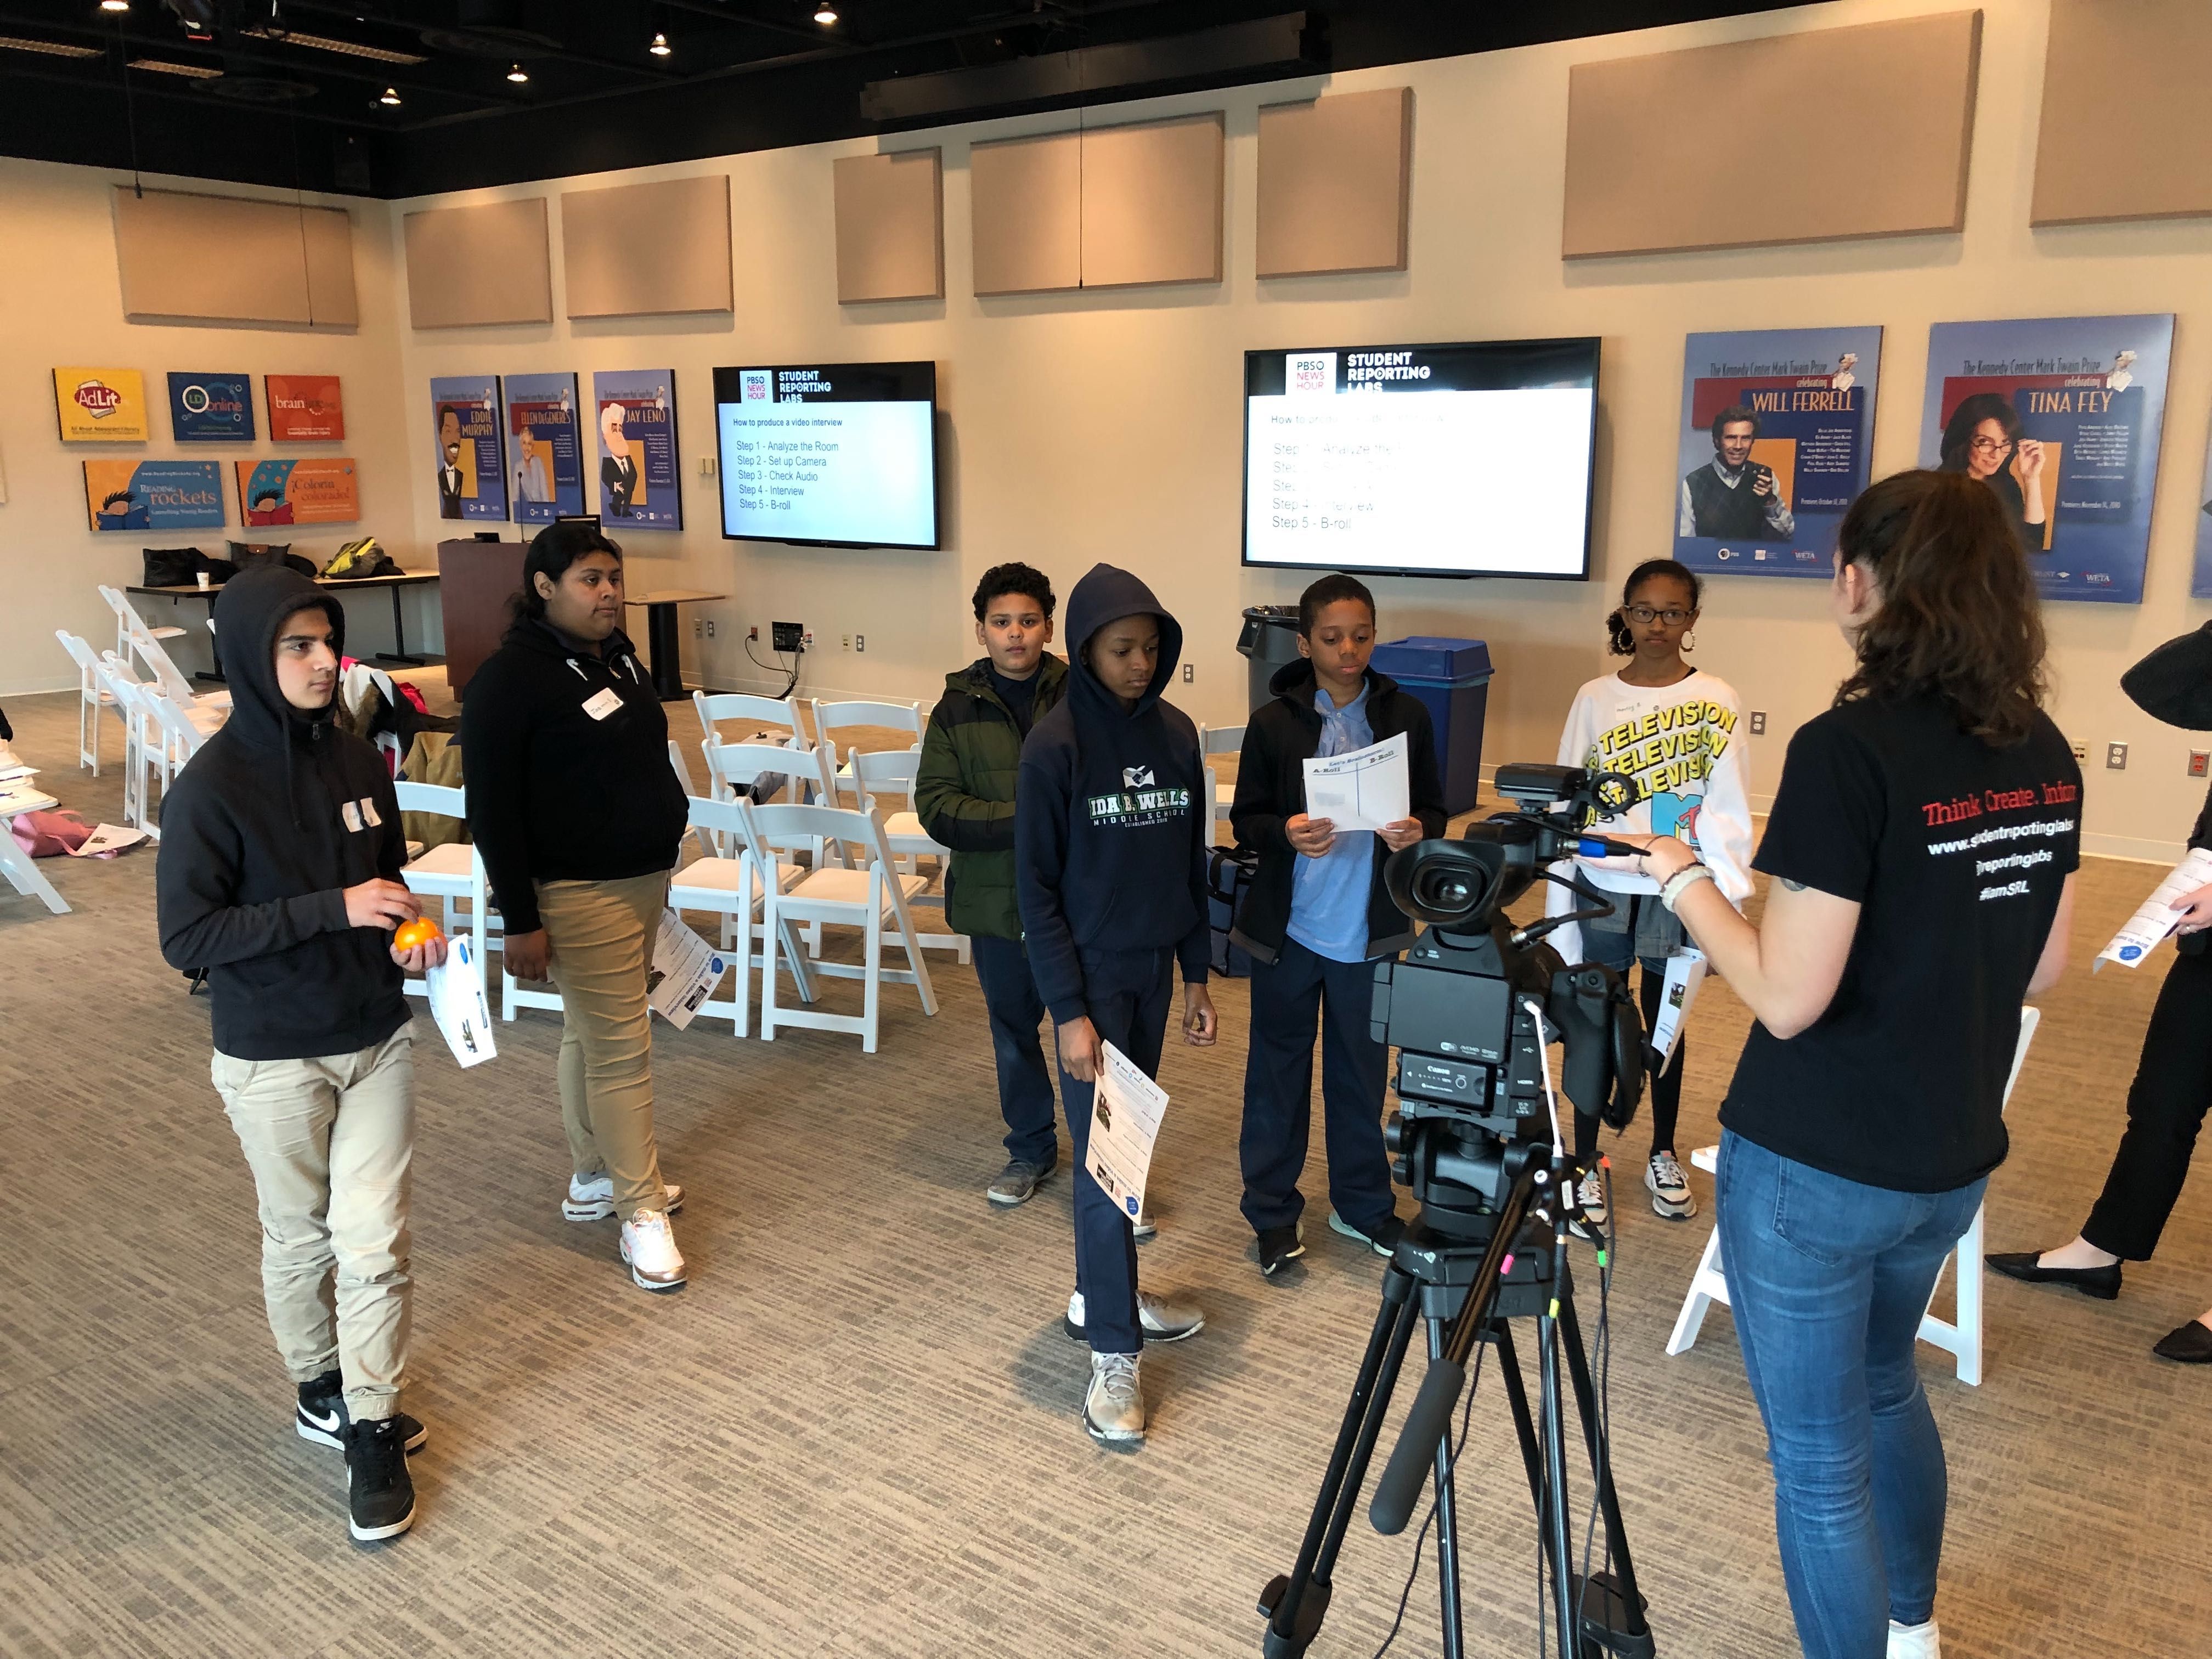 Becky Wandel, production assistant with PBS NewsHour Student Reporting Labs, shows the students how to arrange an on-camera interview. Image by Libby Moeller. United States, 2020.